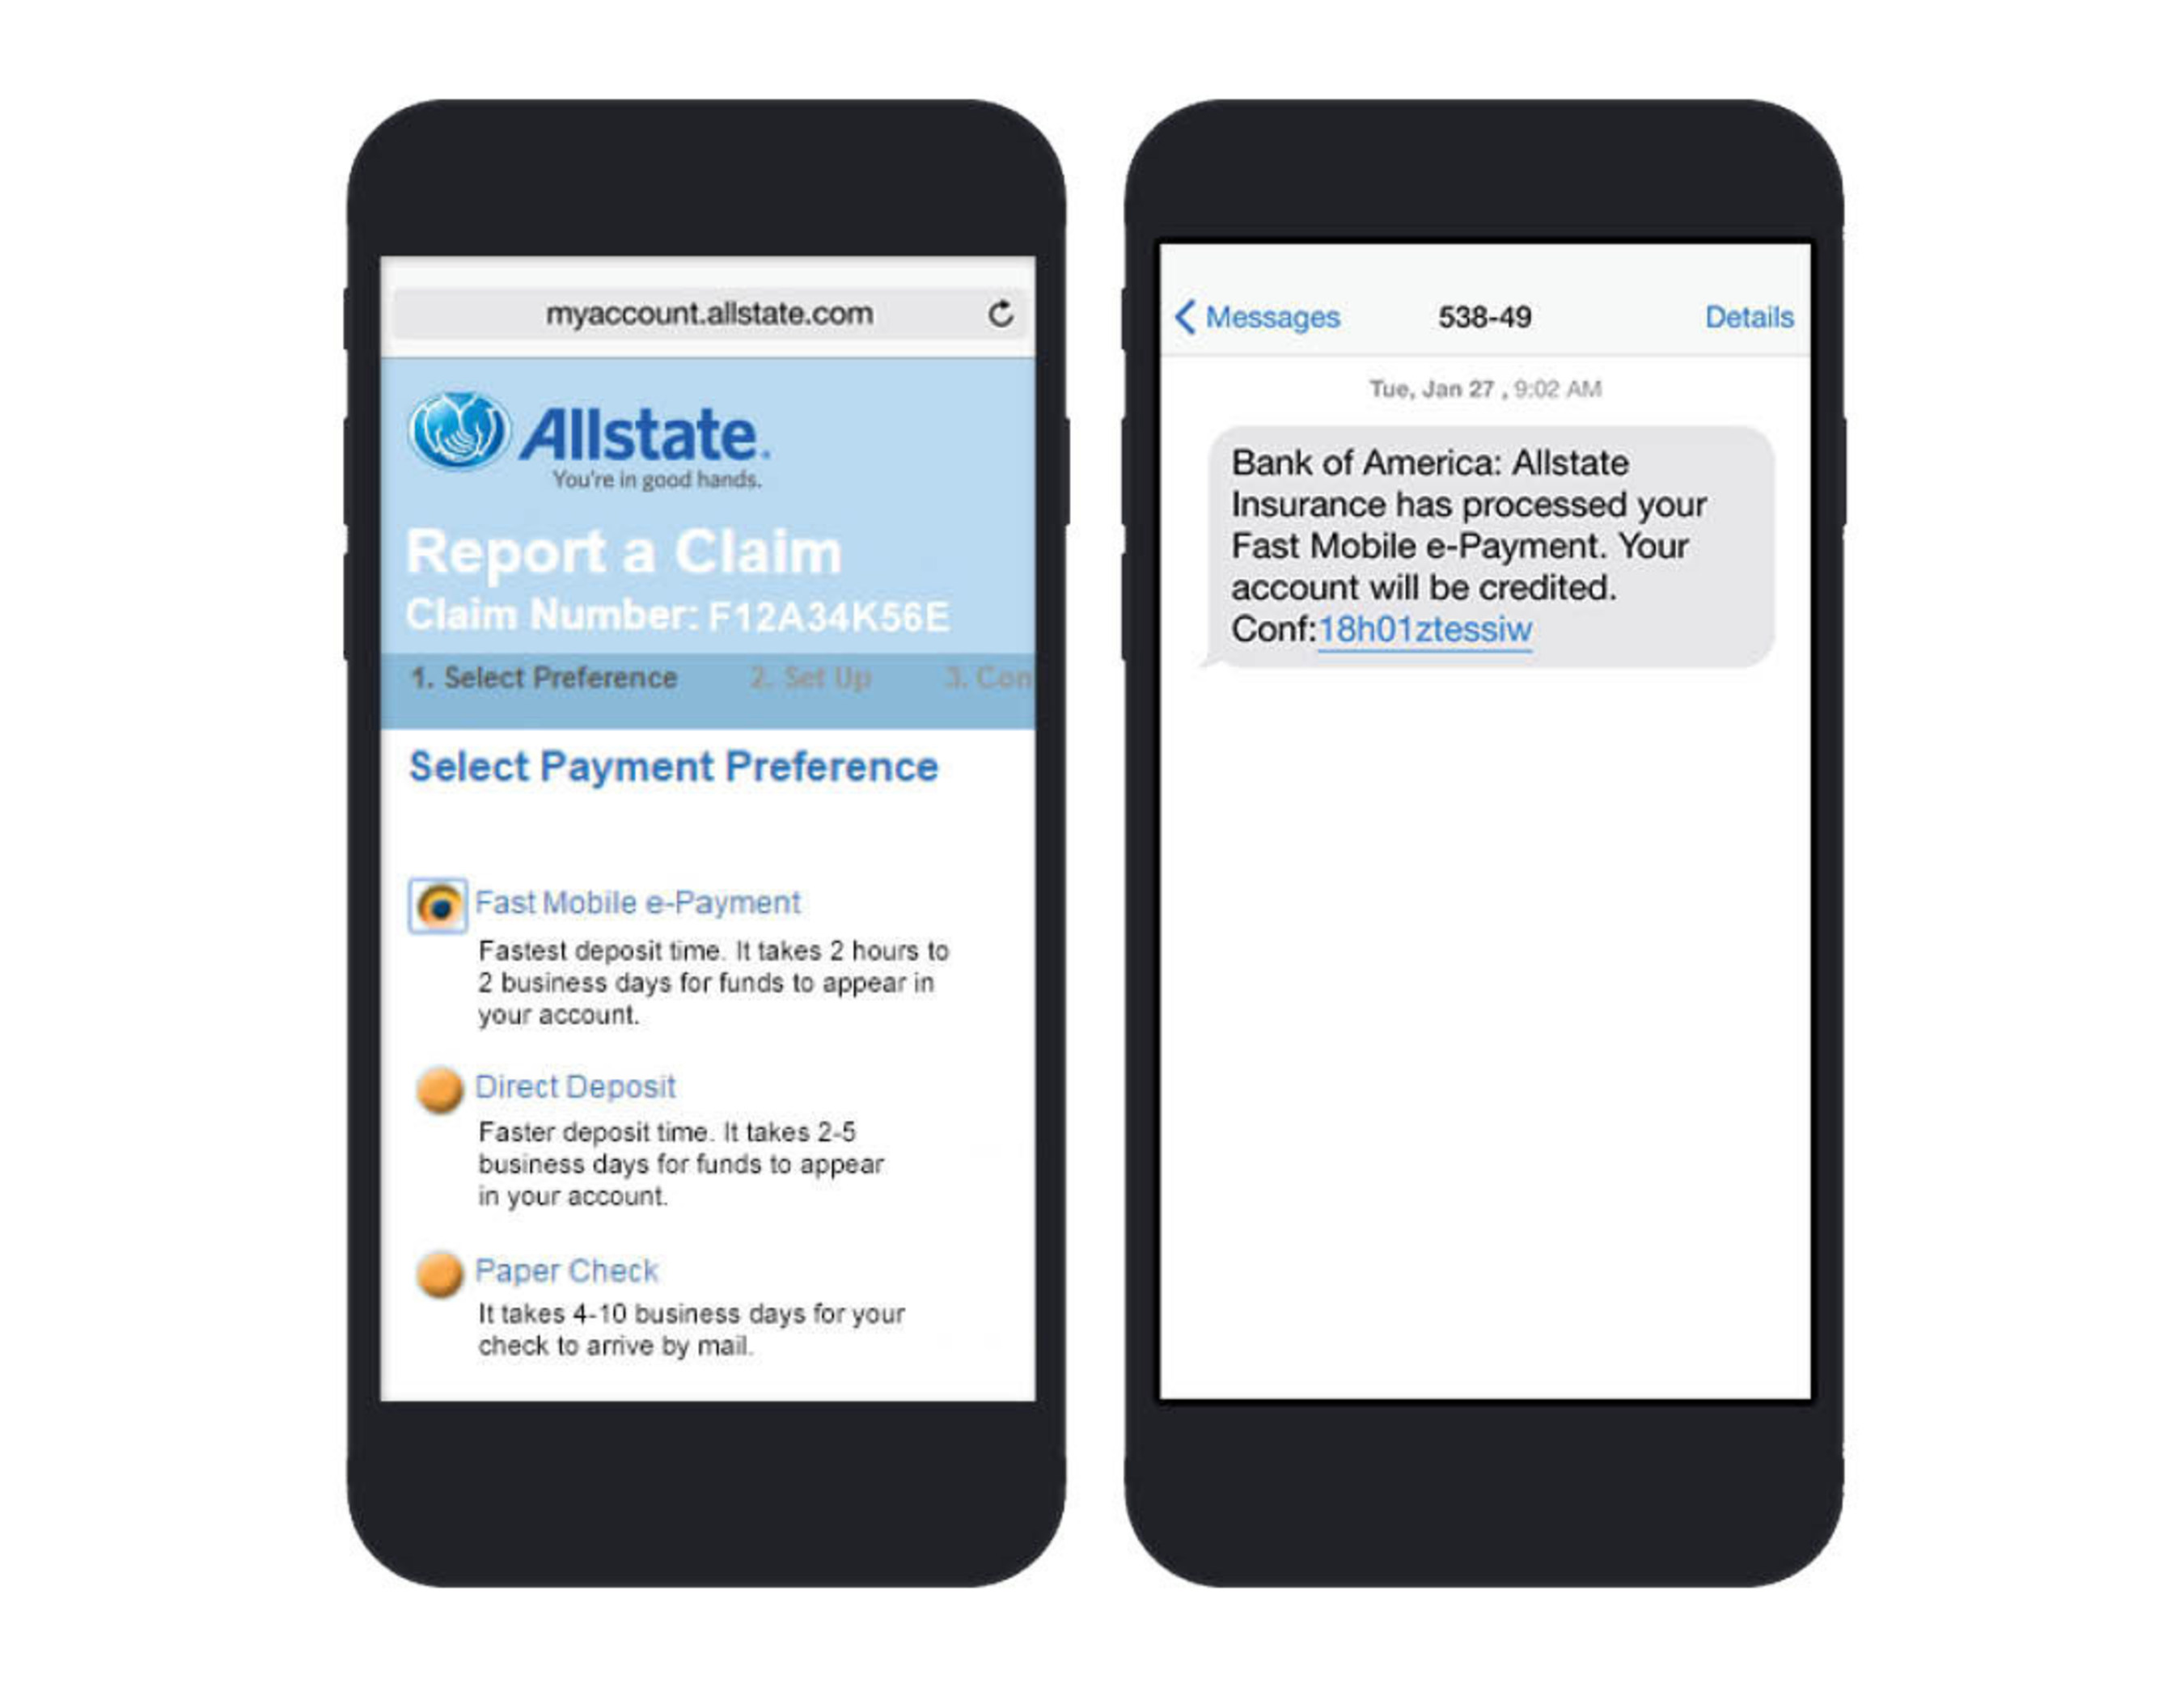 Allstate's Fast Mobile e-Payment(sm) can provide same-day payment through just an email address or mobile phone number.